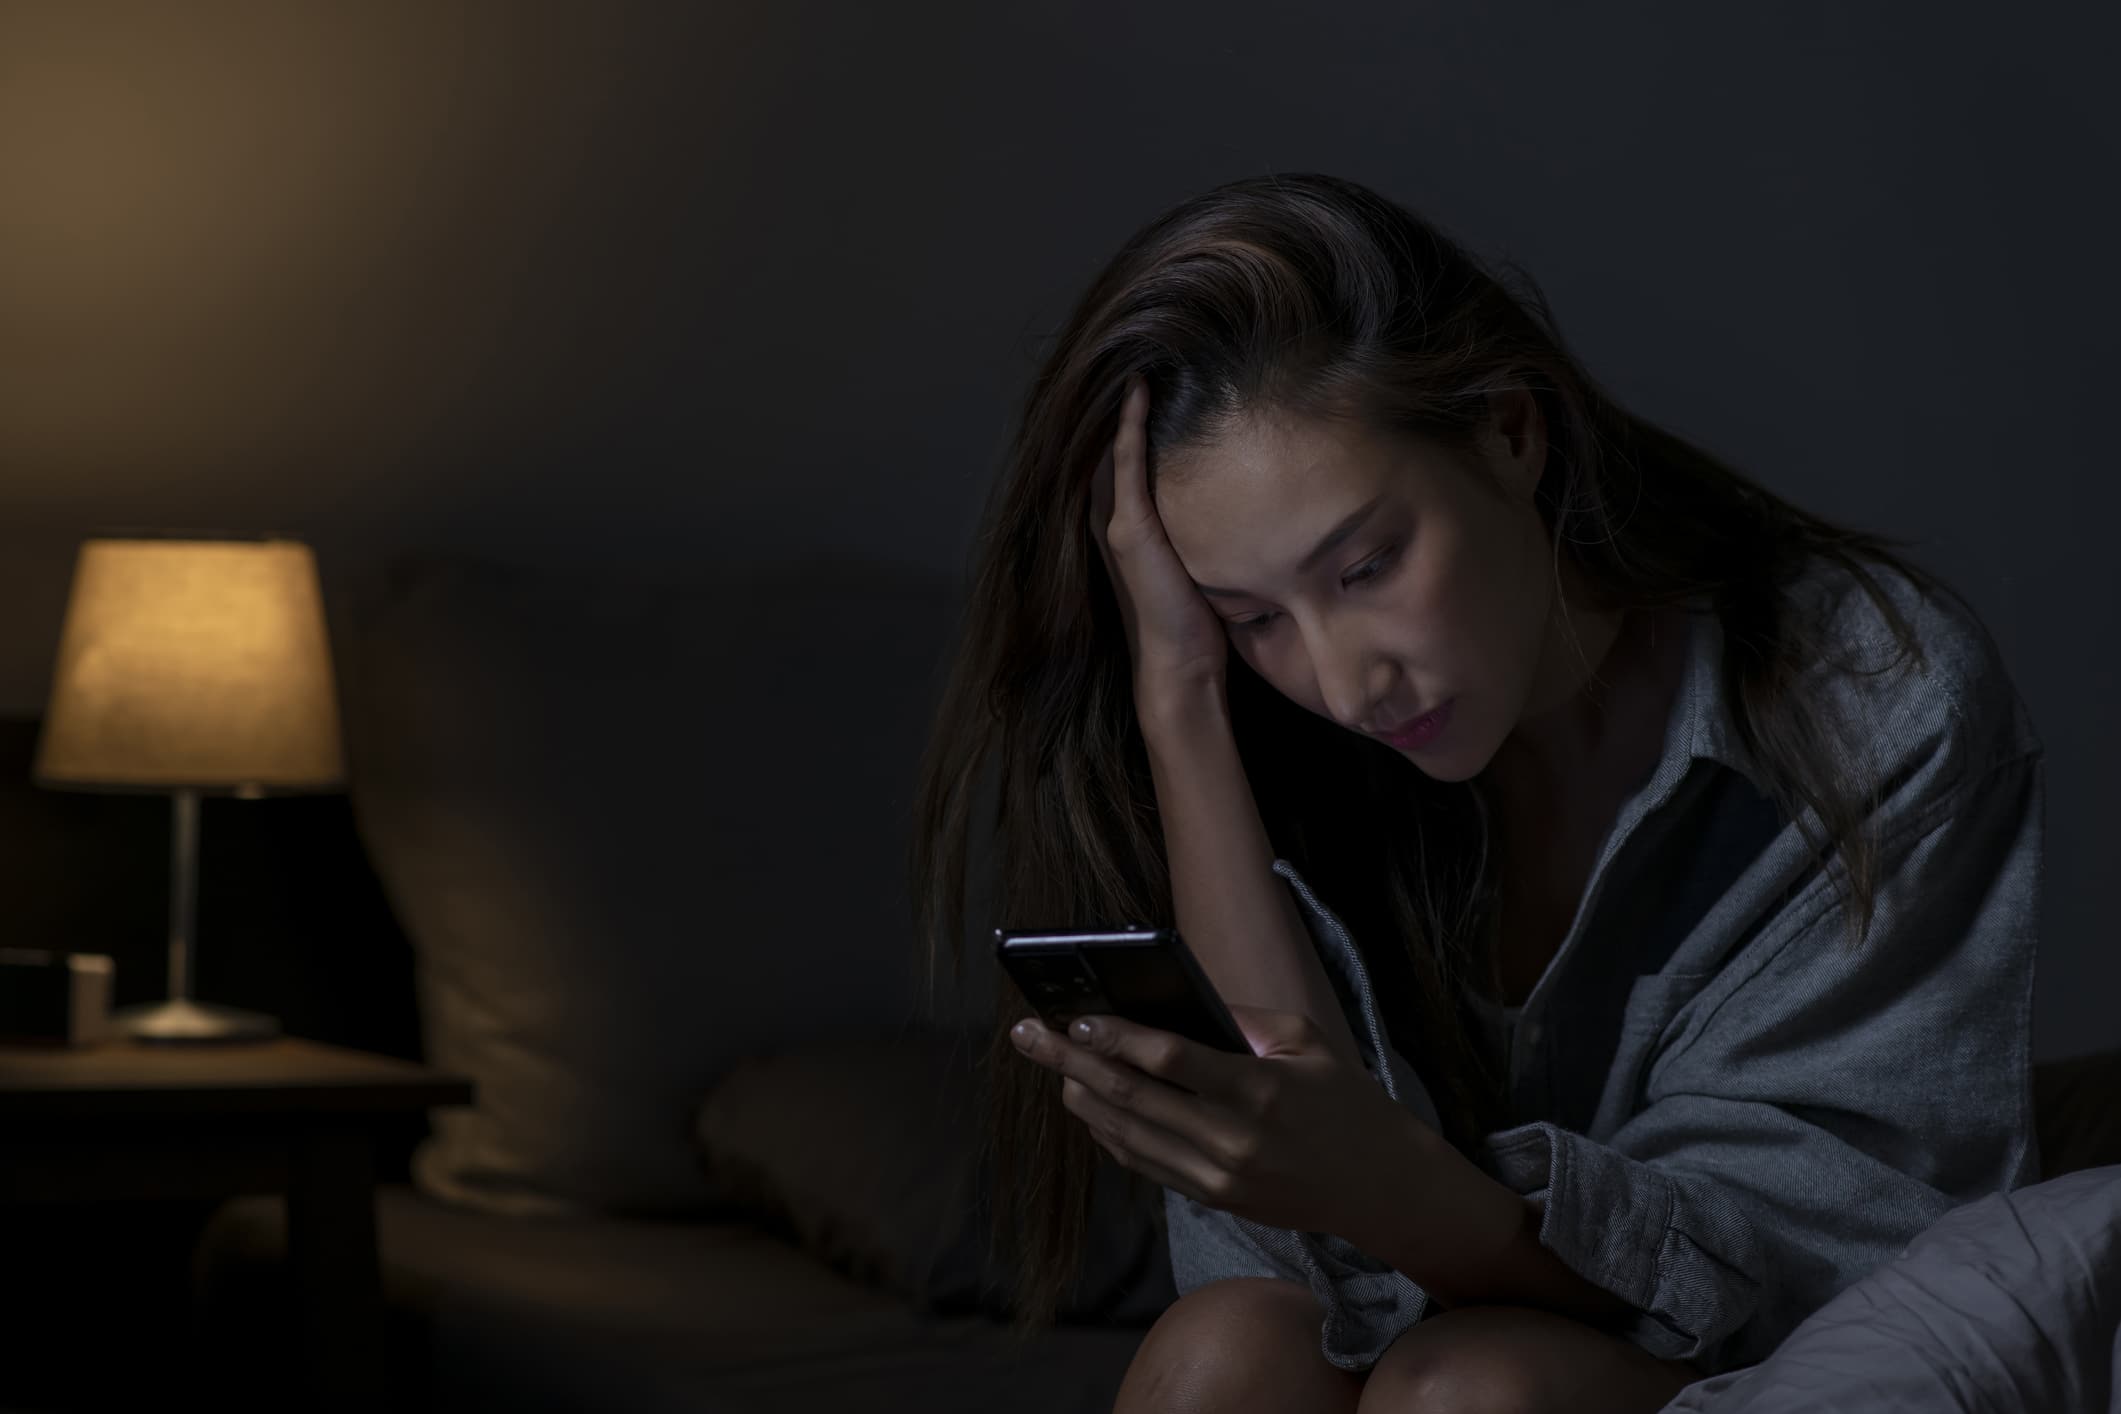 A woman sitting in bed at night phones her doctor's office while experiencing a sudden-onset headache, one of several symptoms that patients call about after normal office hours.